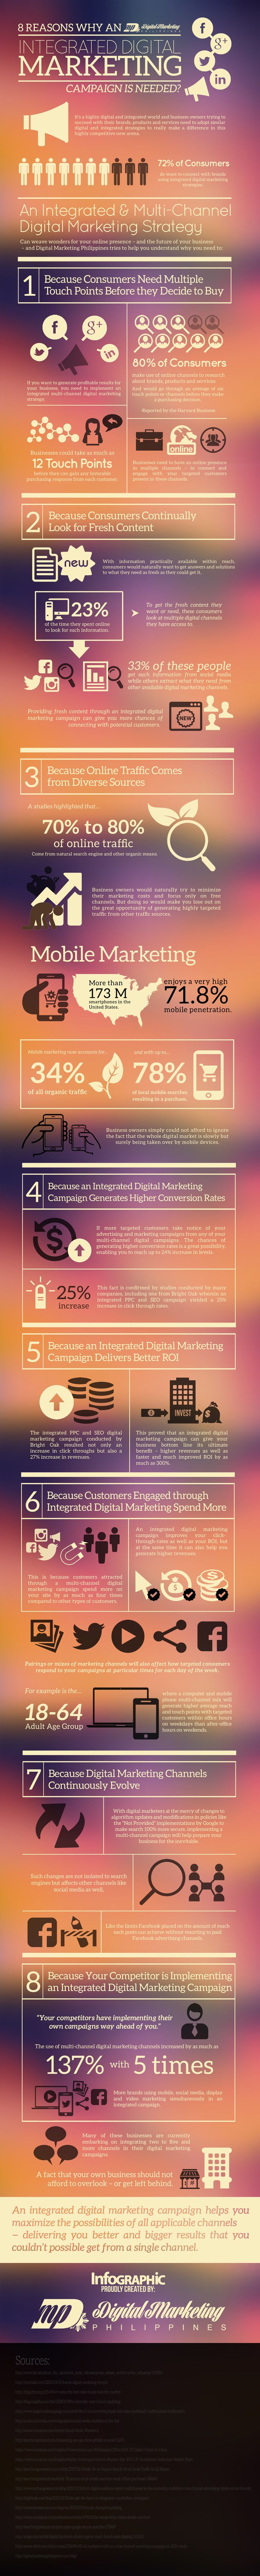 Why A Digital Marketing Campaign Is Needed